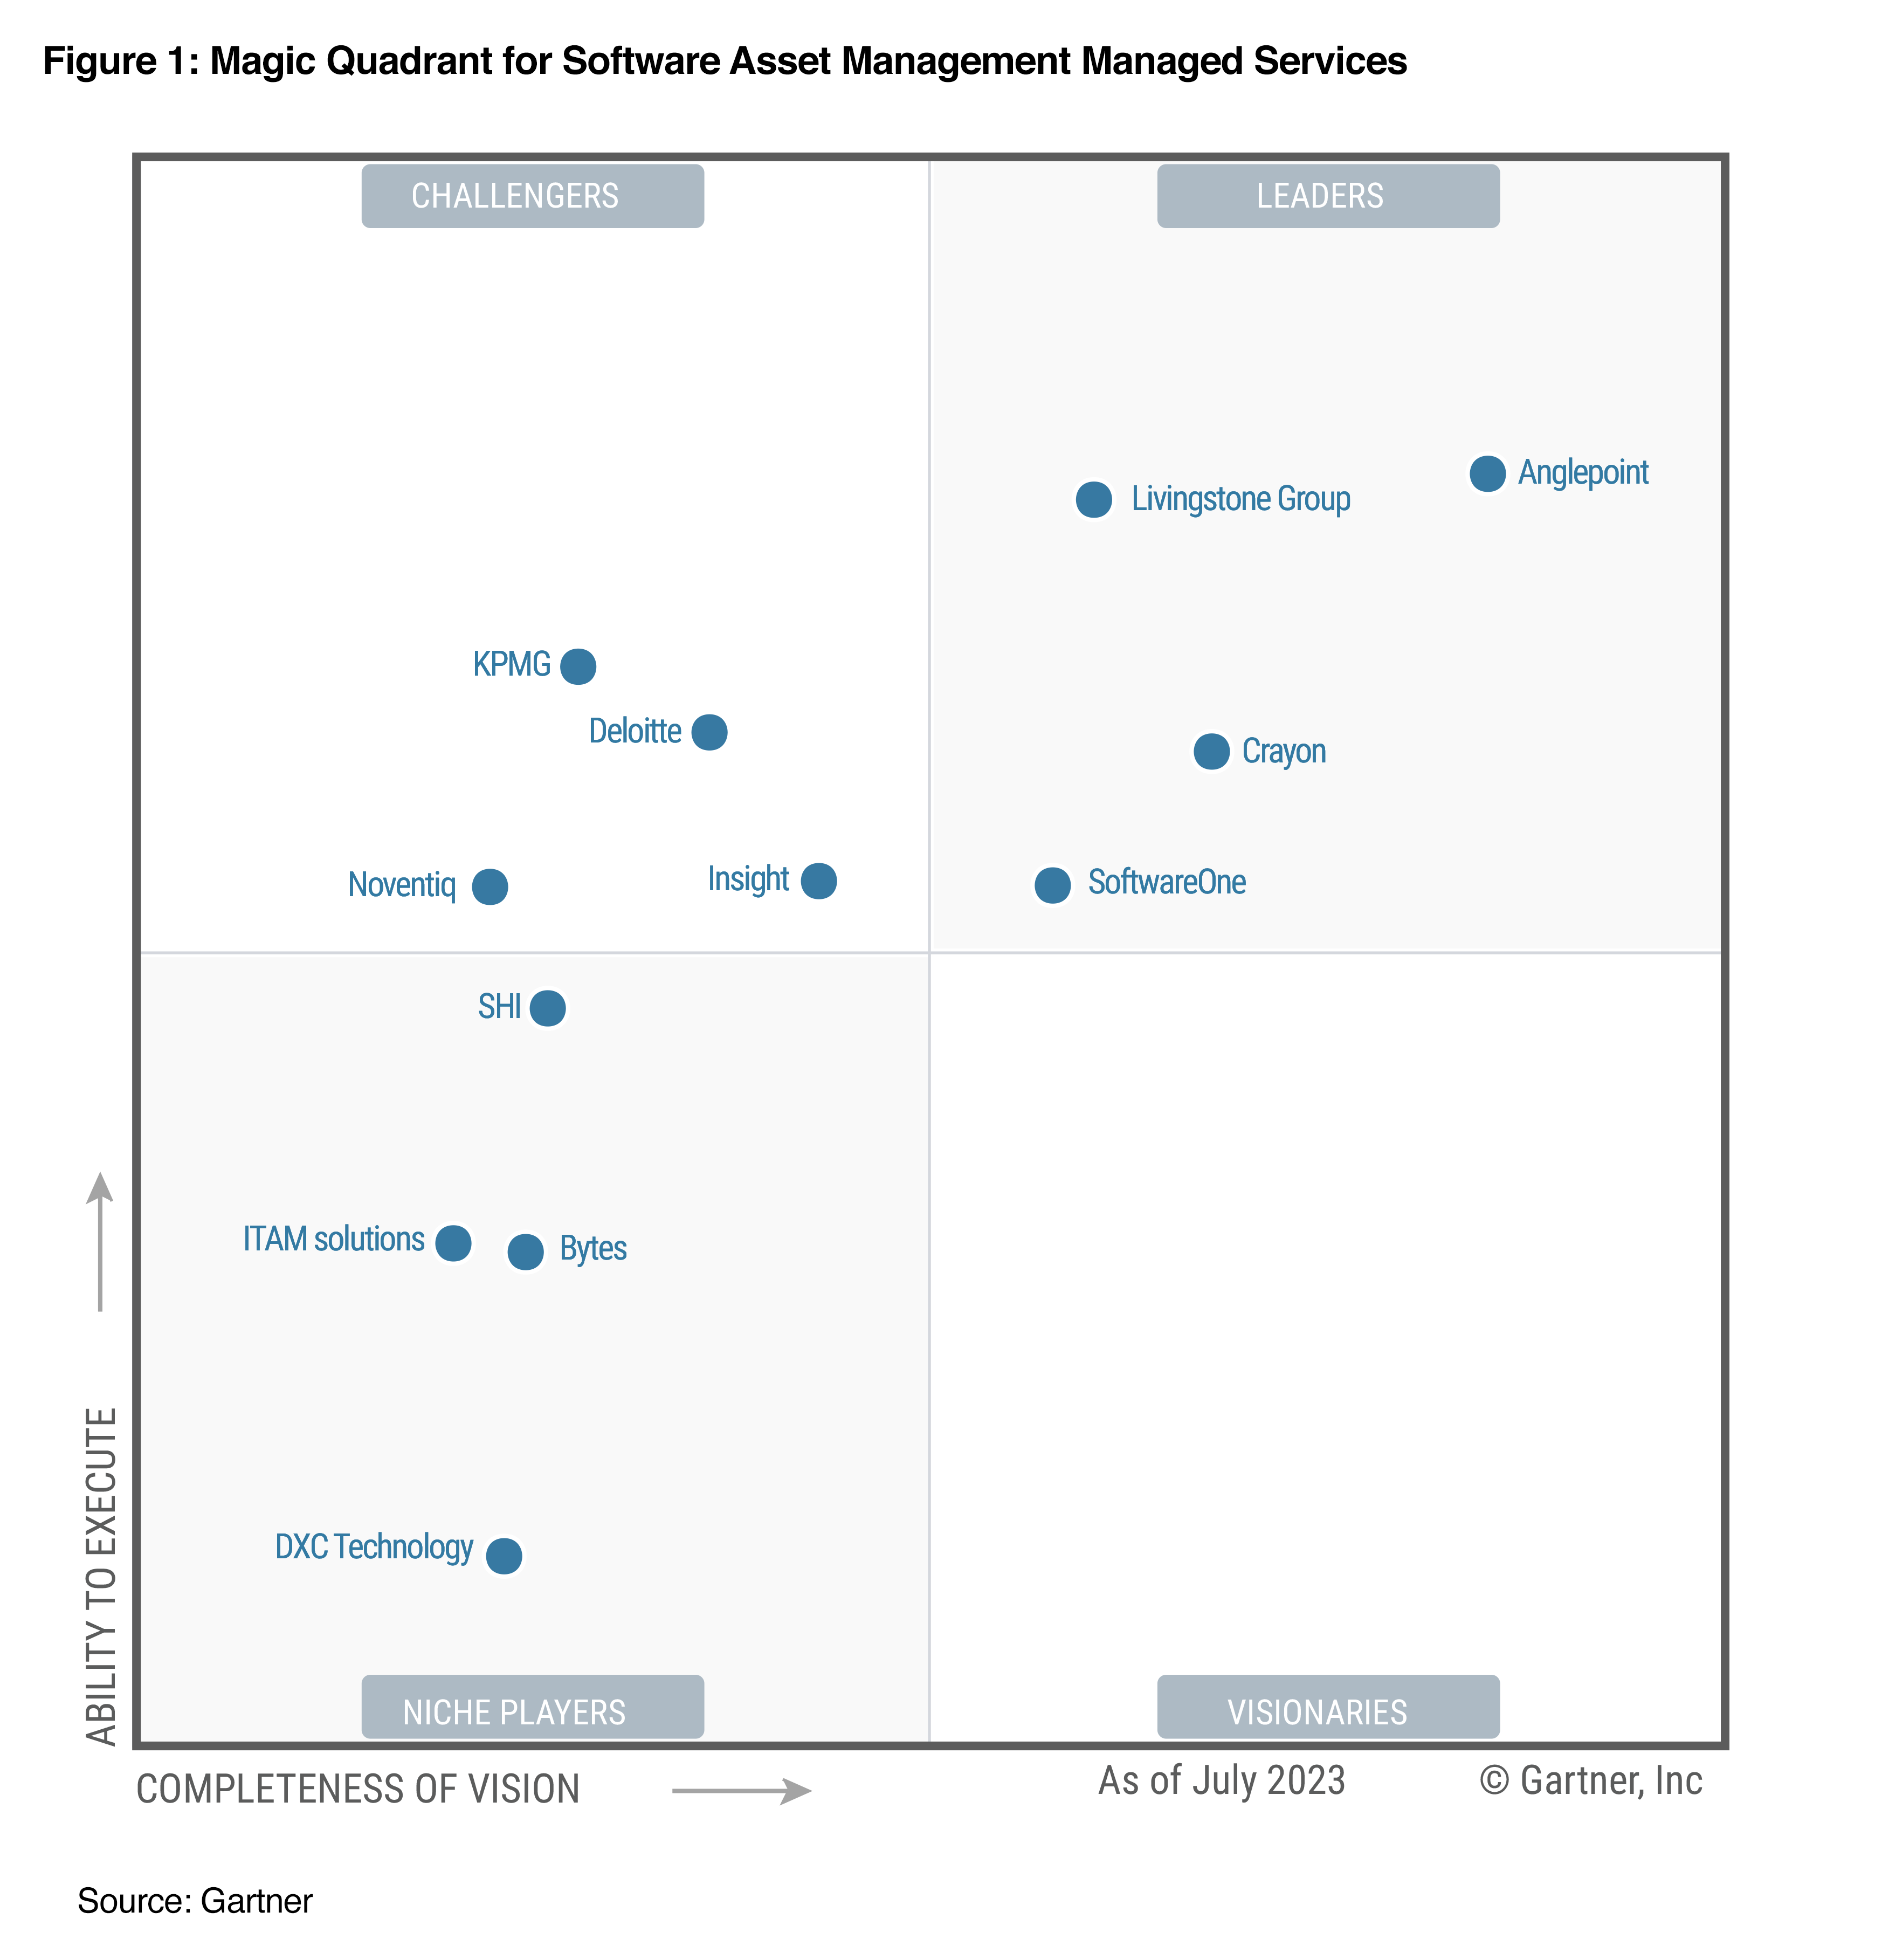 2023 Gartner Magic Quadrant for SAM Managed Services showing Anglepoint at the highest and furthest to the right on the graph.